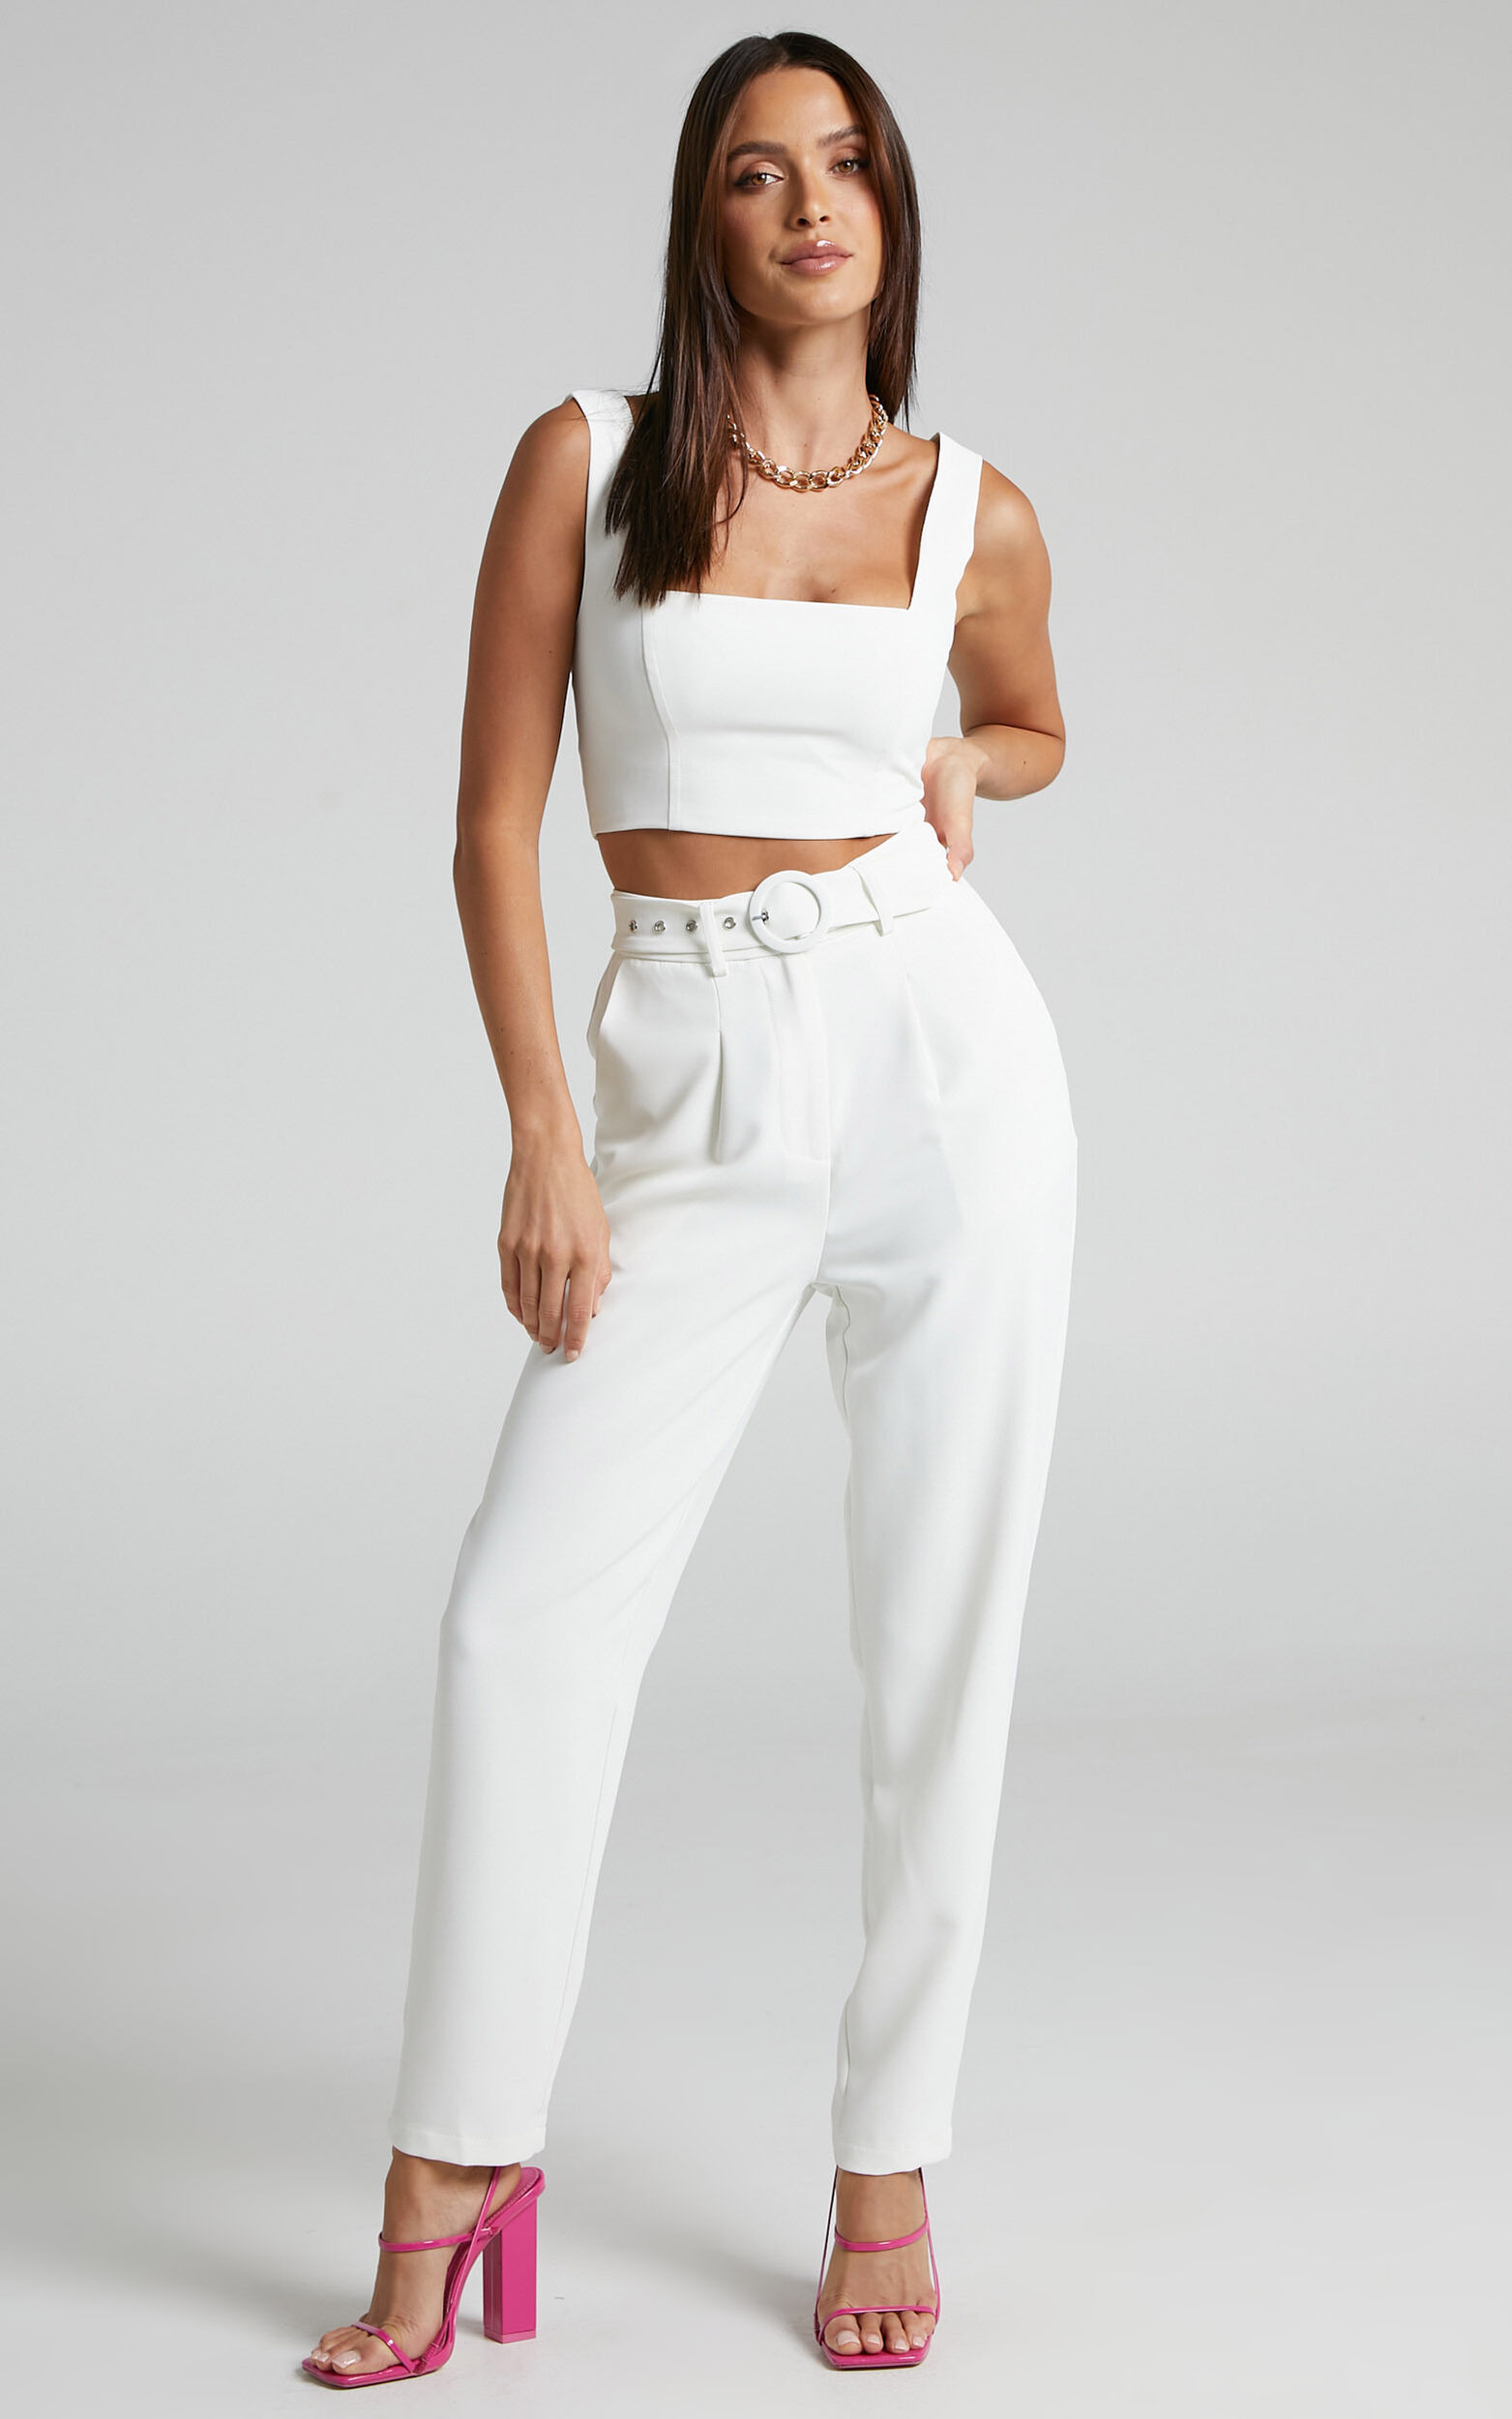 Reyna Two Piece Set - Crop Top and Tailored Pants Set in White - 04, WHT1